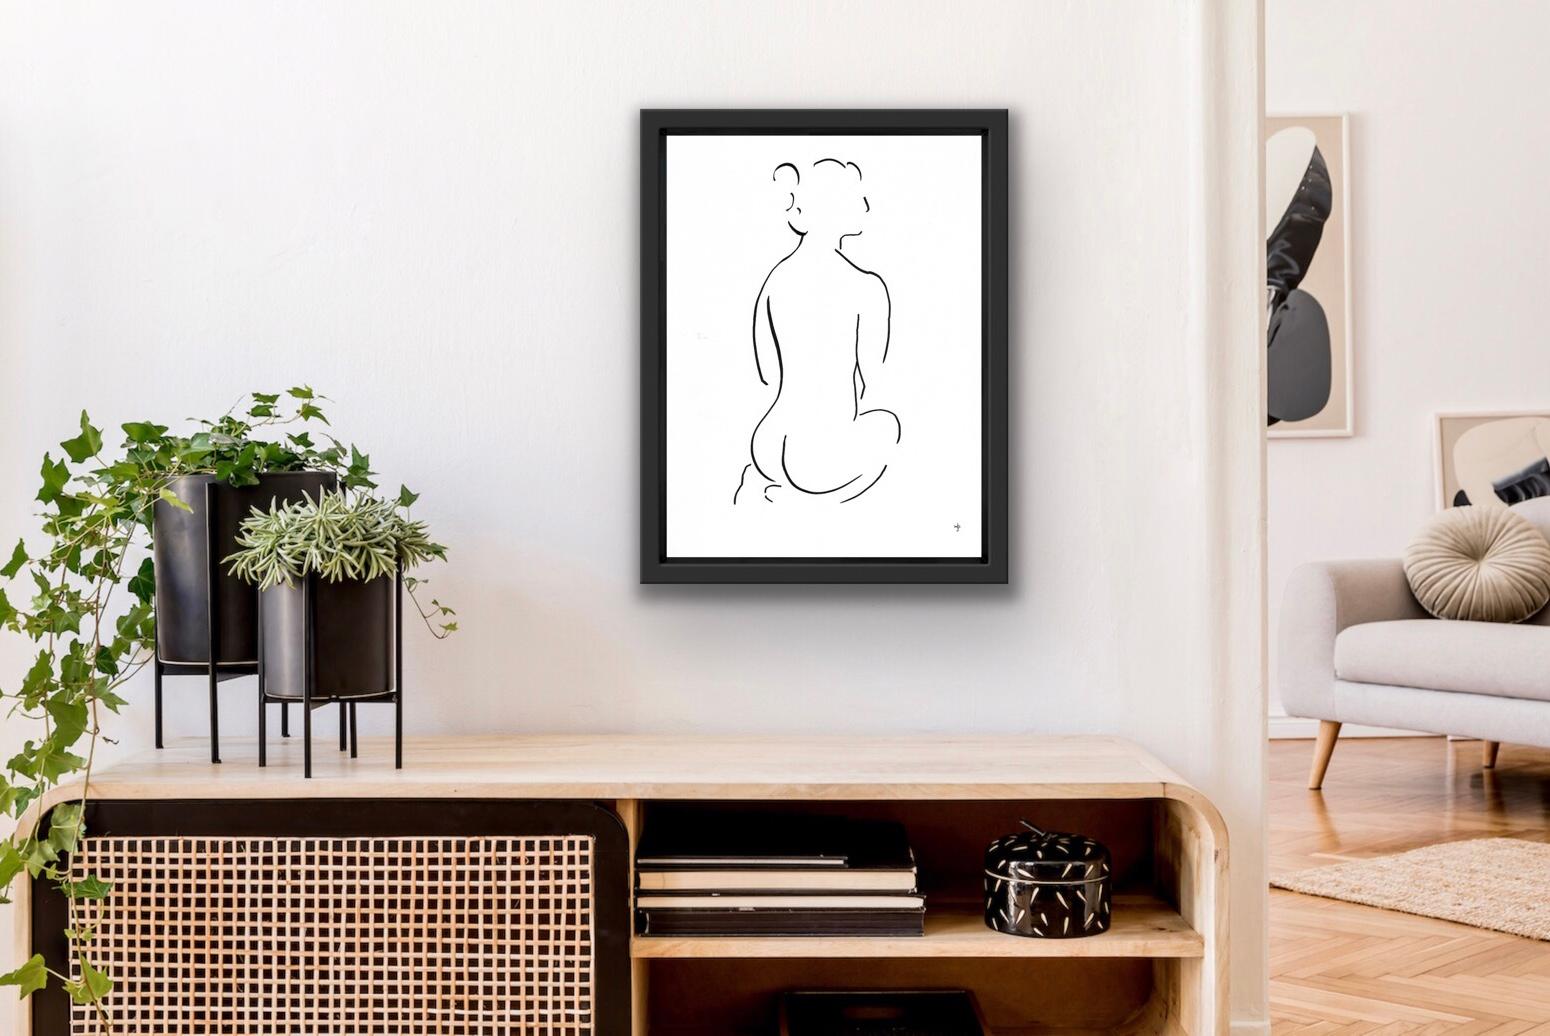 #2203D is an original drawing by David Jones. David Jones, artist, is pleased to present a series of nude drawings in the style of Matisse. 

ADDITIONAL INFORMATION:
#2203D by David Jones [2022]
original
Black ink on paper
Image size: H:39 cm x W:30